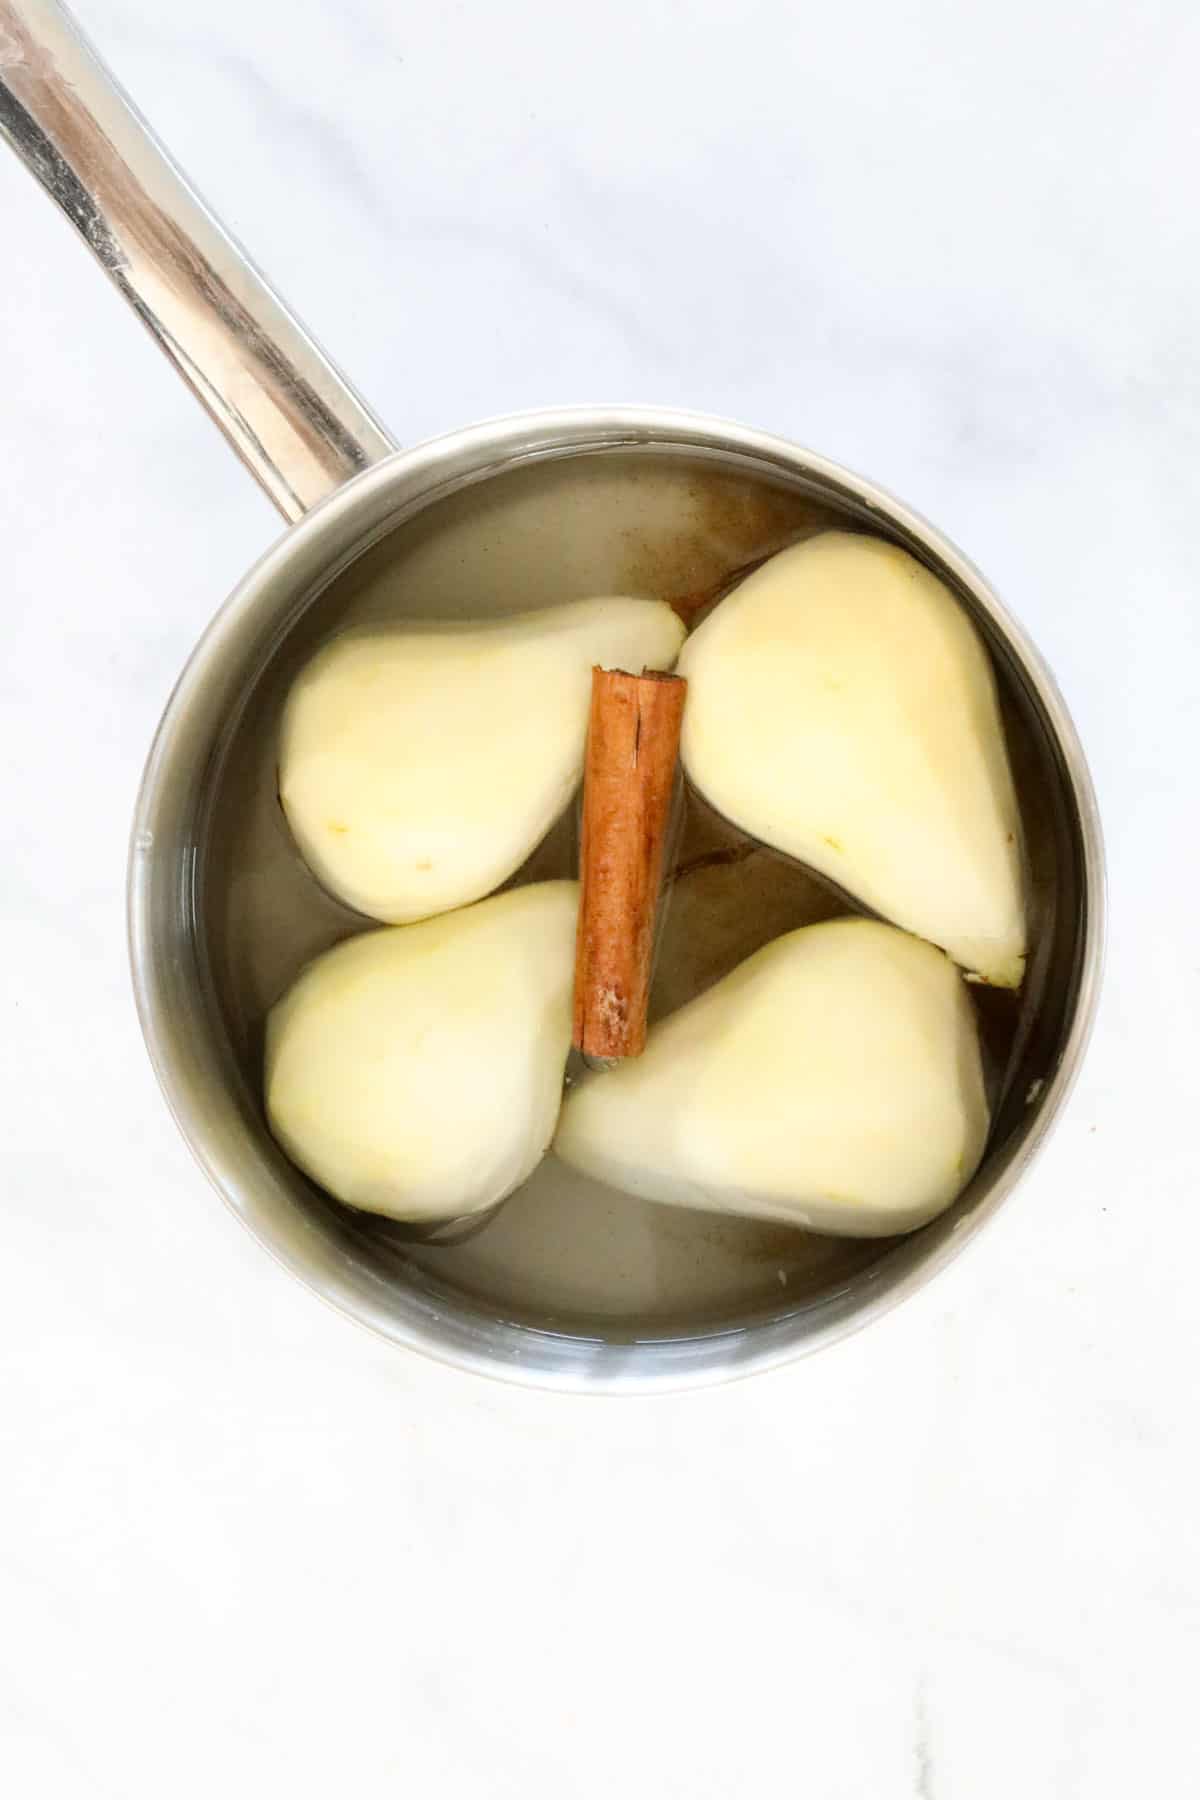 Peeled pears in a saucepan with cinnamon quills.